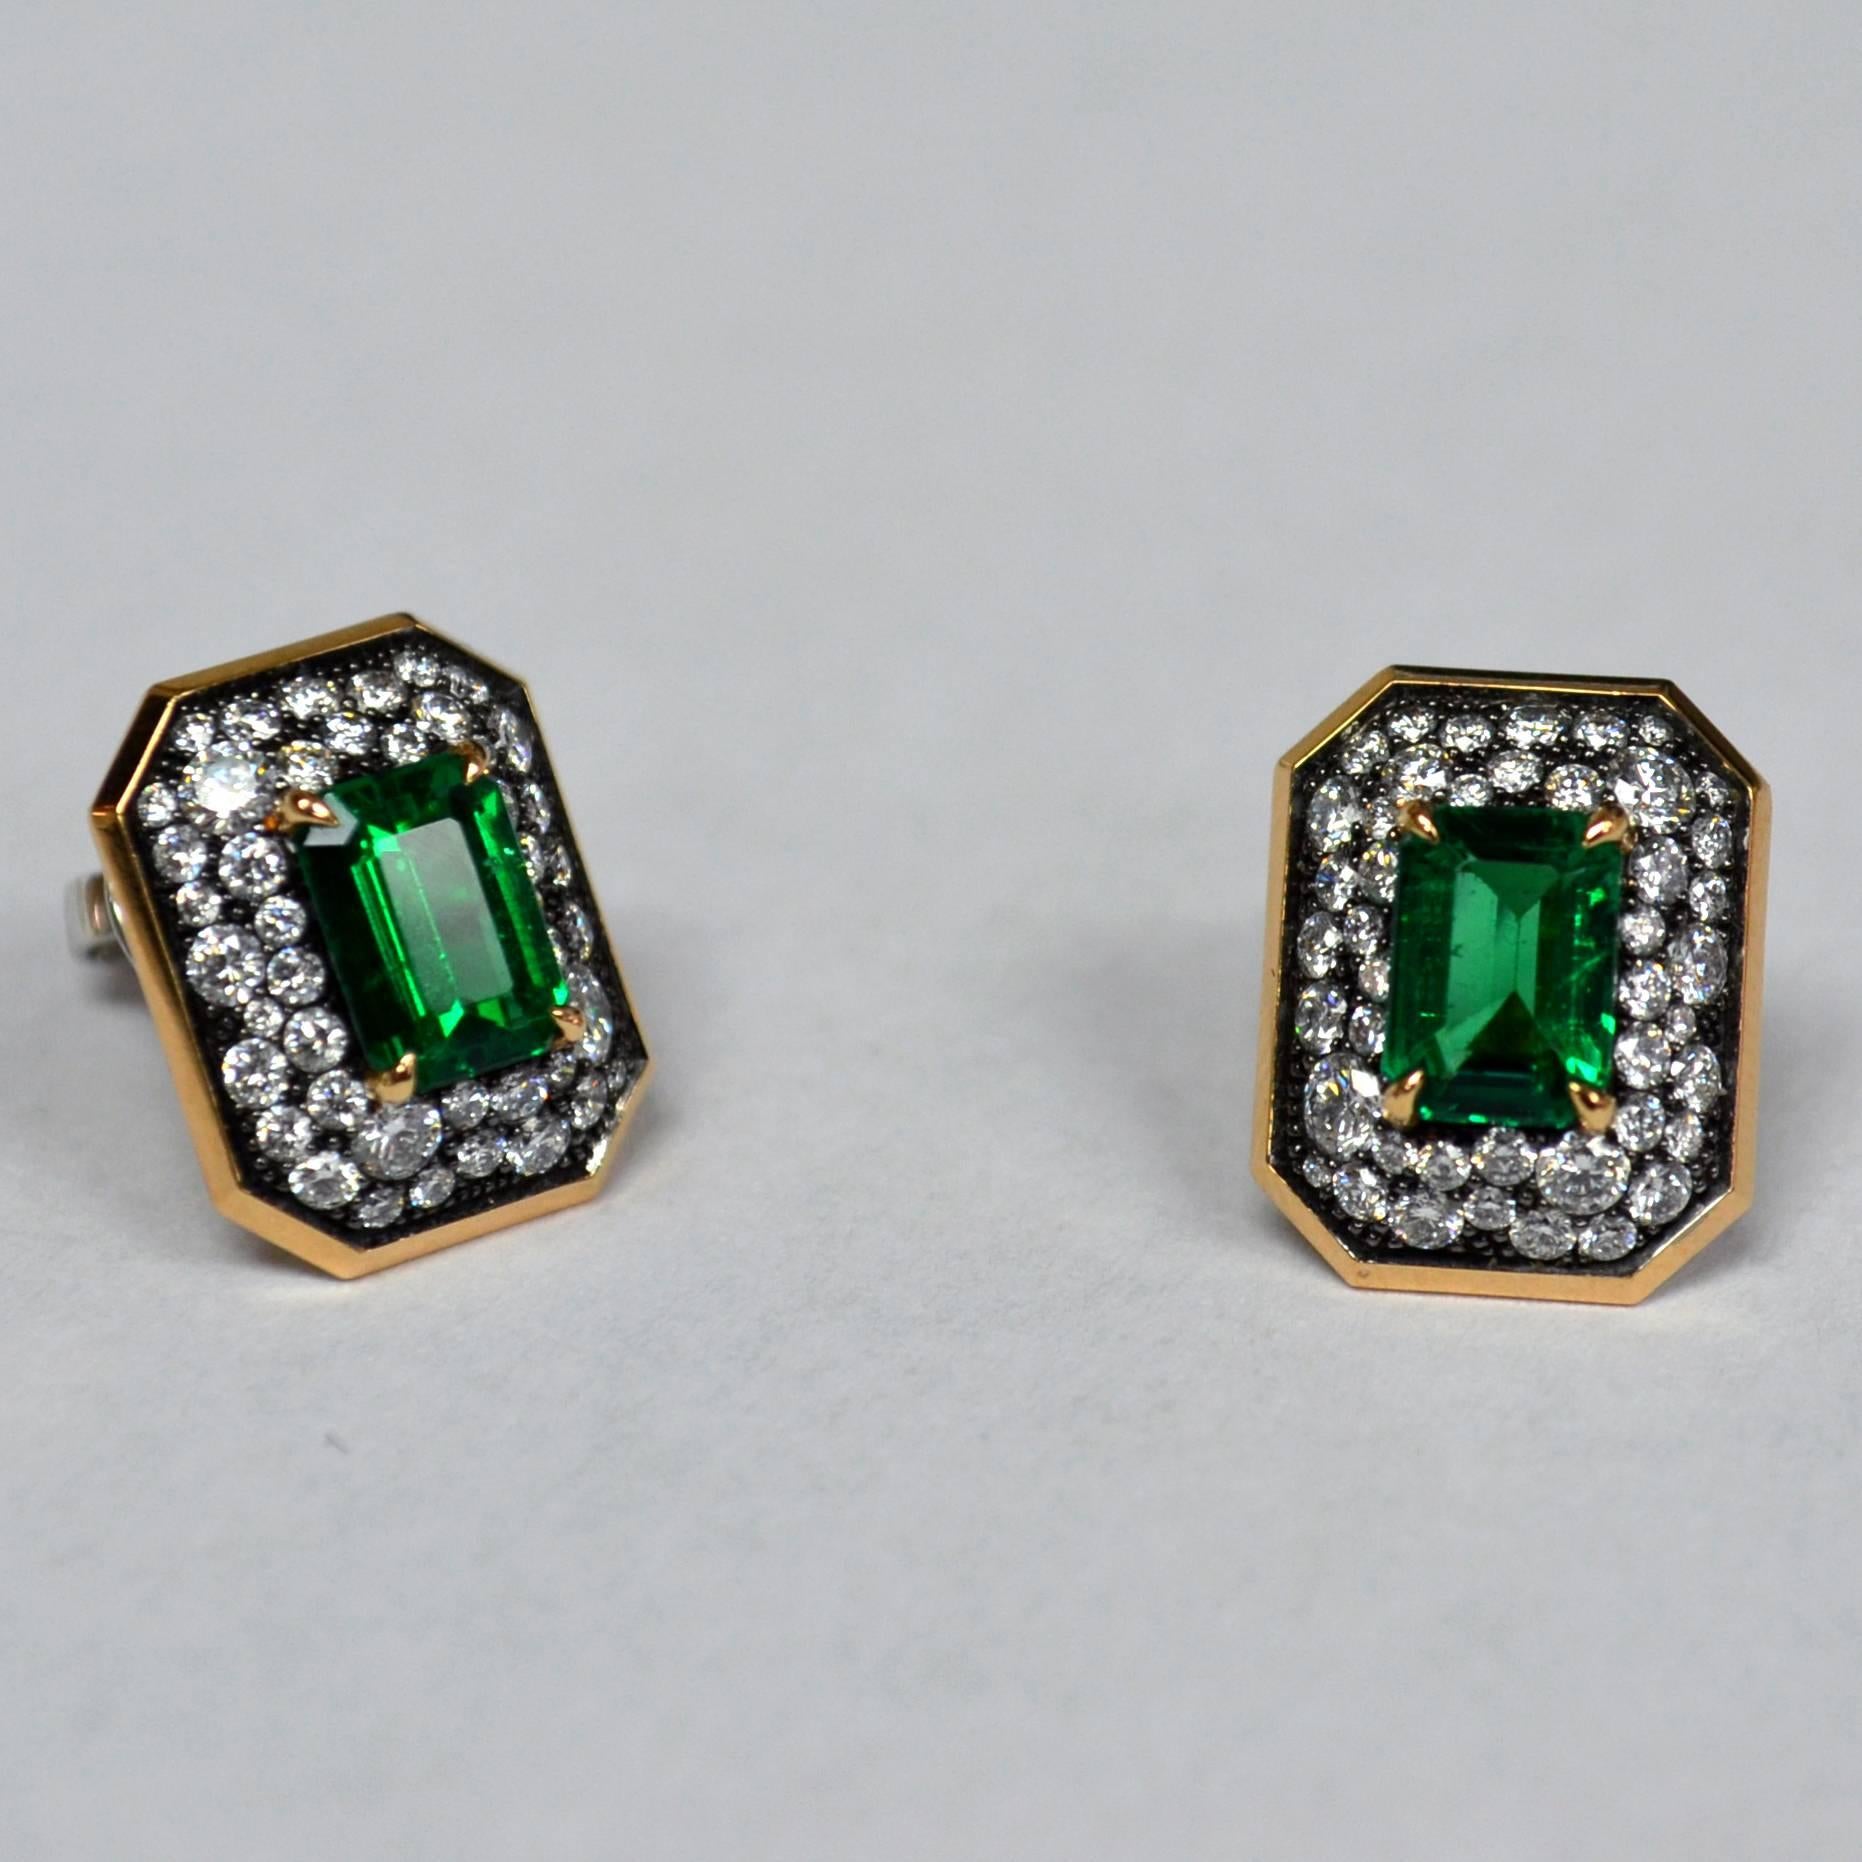 Earrings in 18 karat black rhodium yellow gold set with 2 emerald cut 7x5 mm Emeralds (1.49 carats) and 88 round brilliant-cut diamonds (1.05 carats).

Push Back closure with 18 karat white gold La Pousette earring backings. 